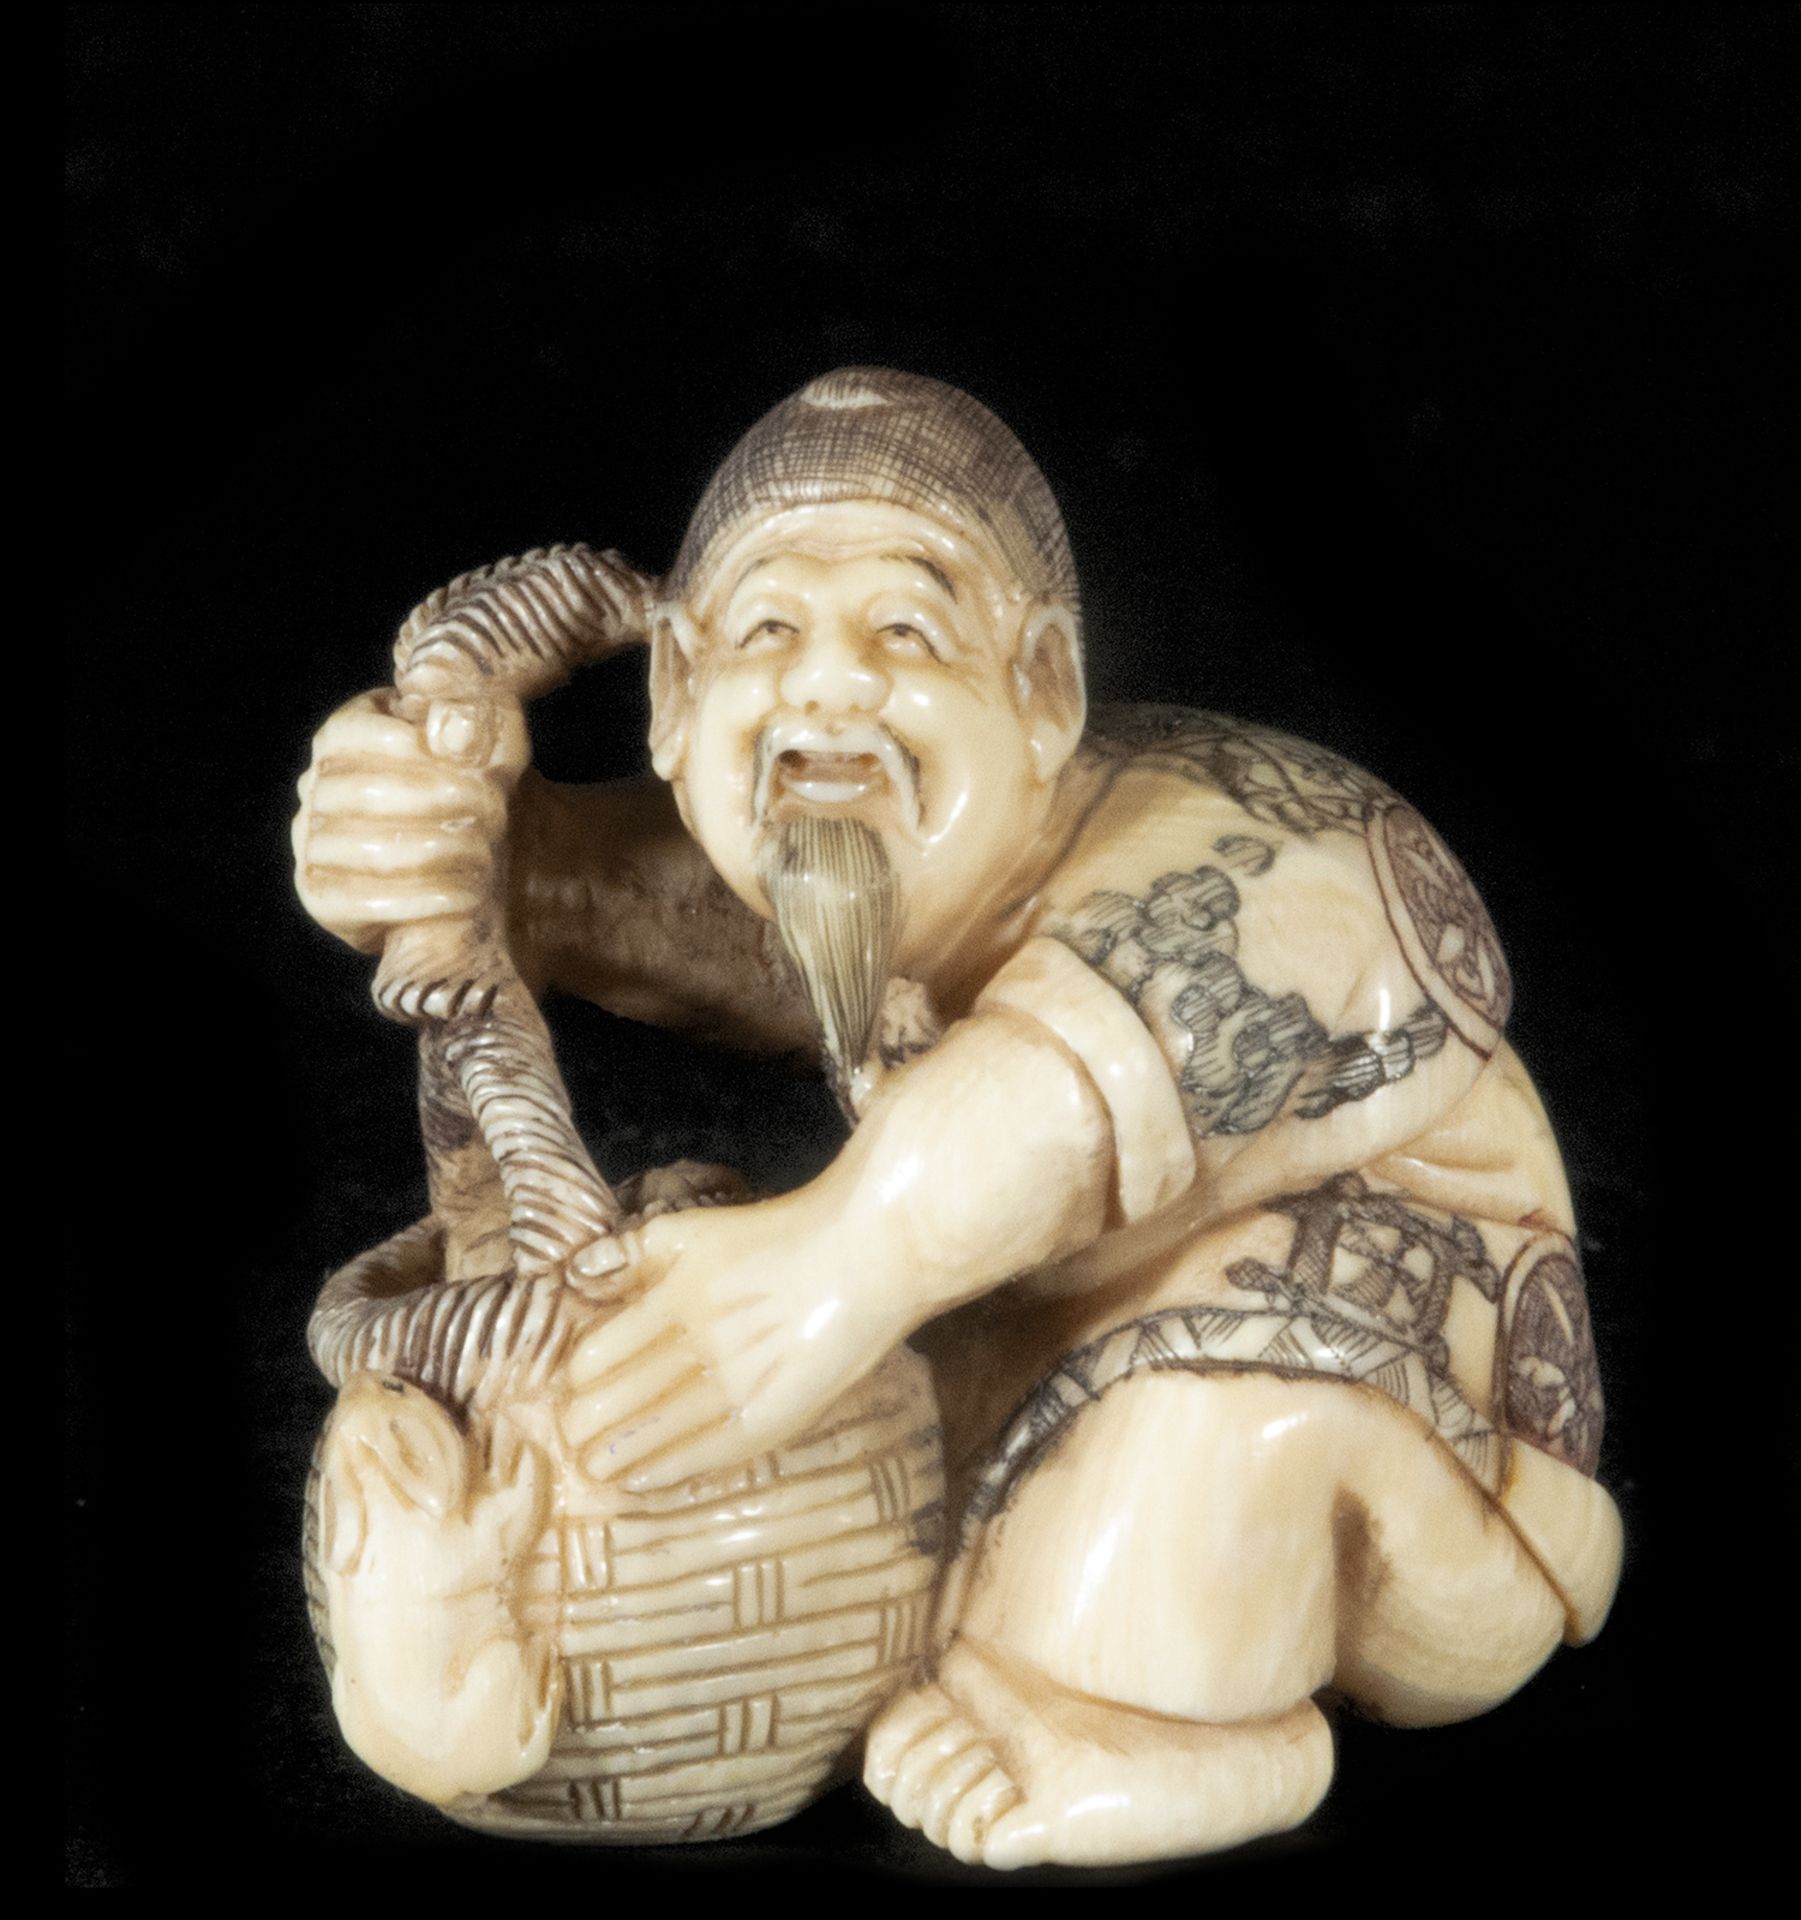 Japanese Netsuke on Mammoth Tusk (Mammuthus primigenius) depicting old man with barrel and mouse, 19